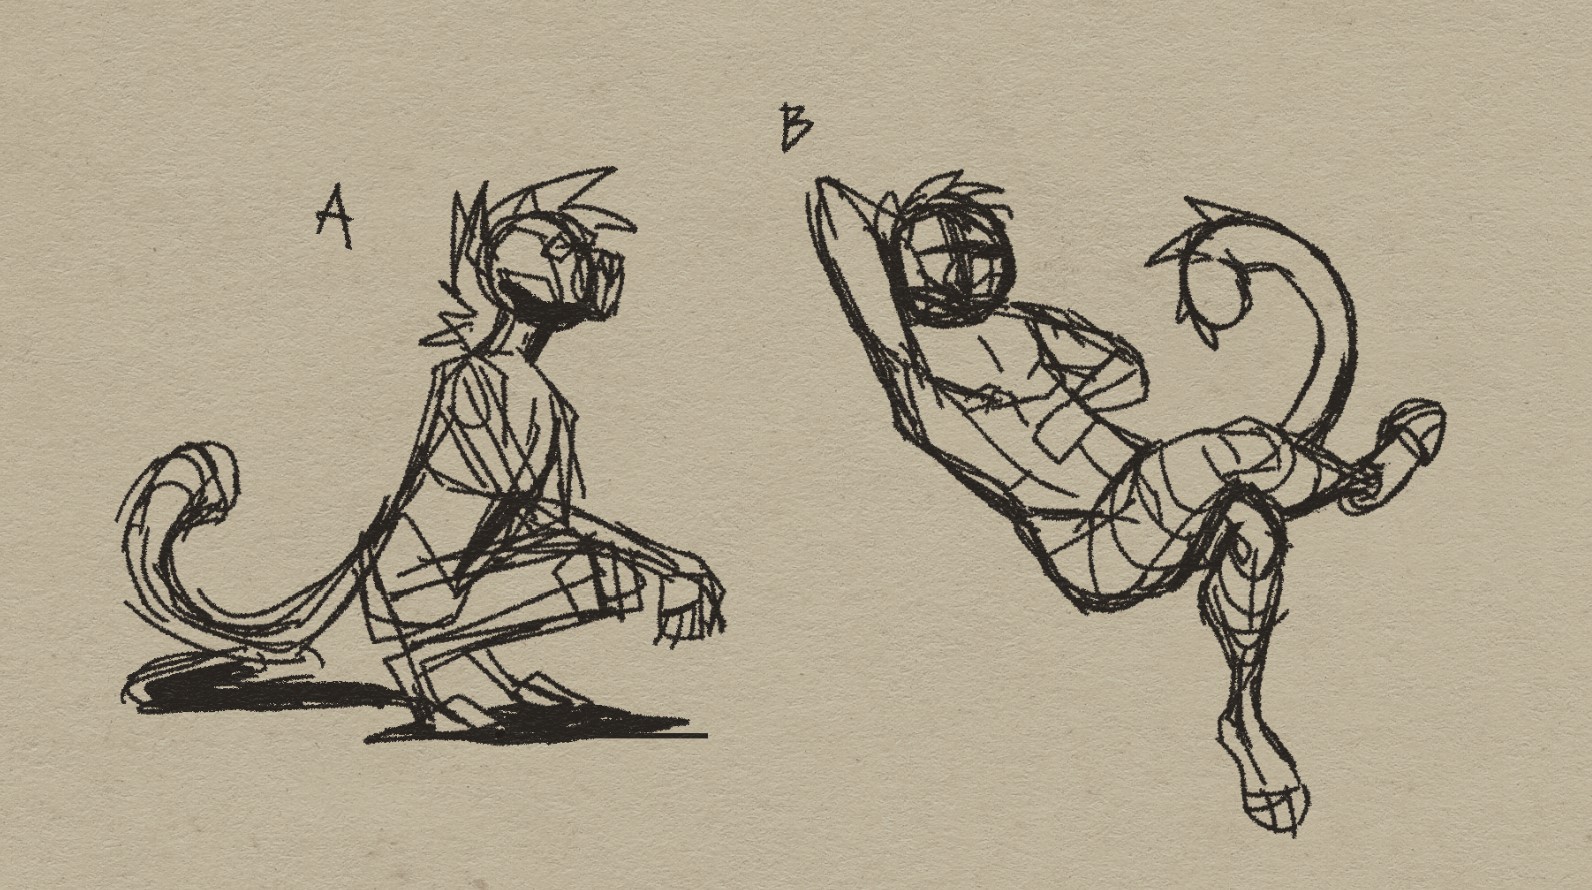 Sketches of an anthro feline, one crouching and one napping like the above image.